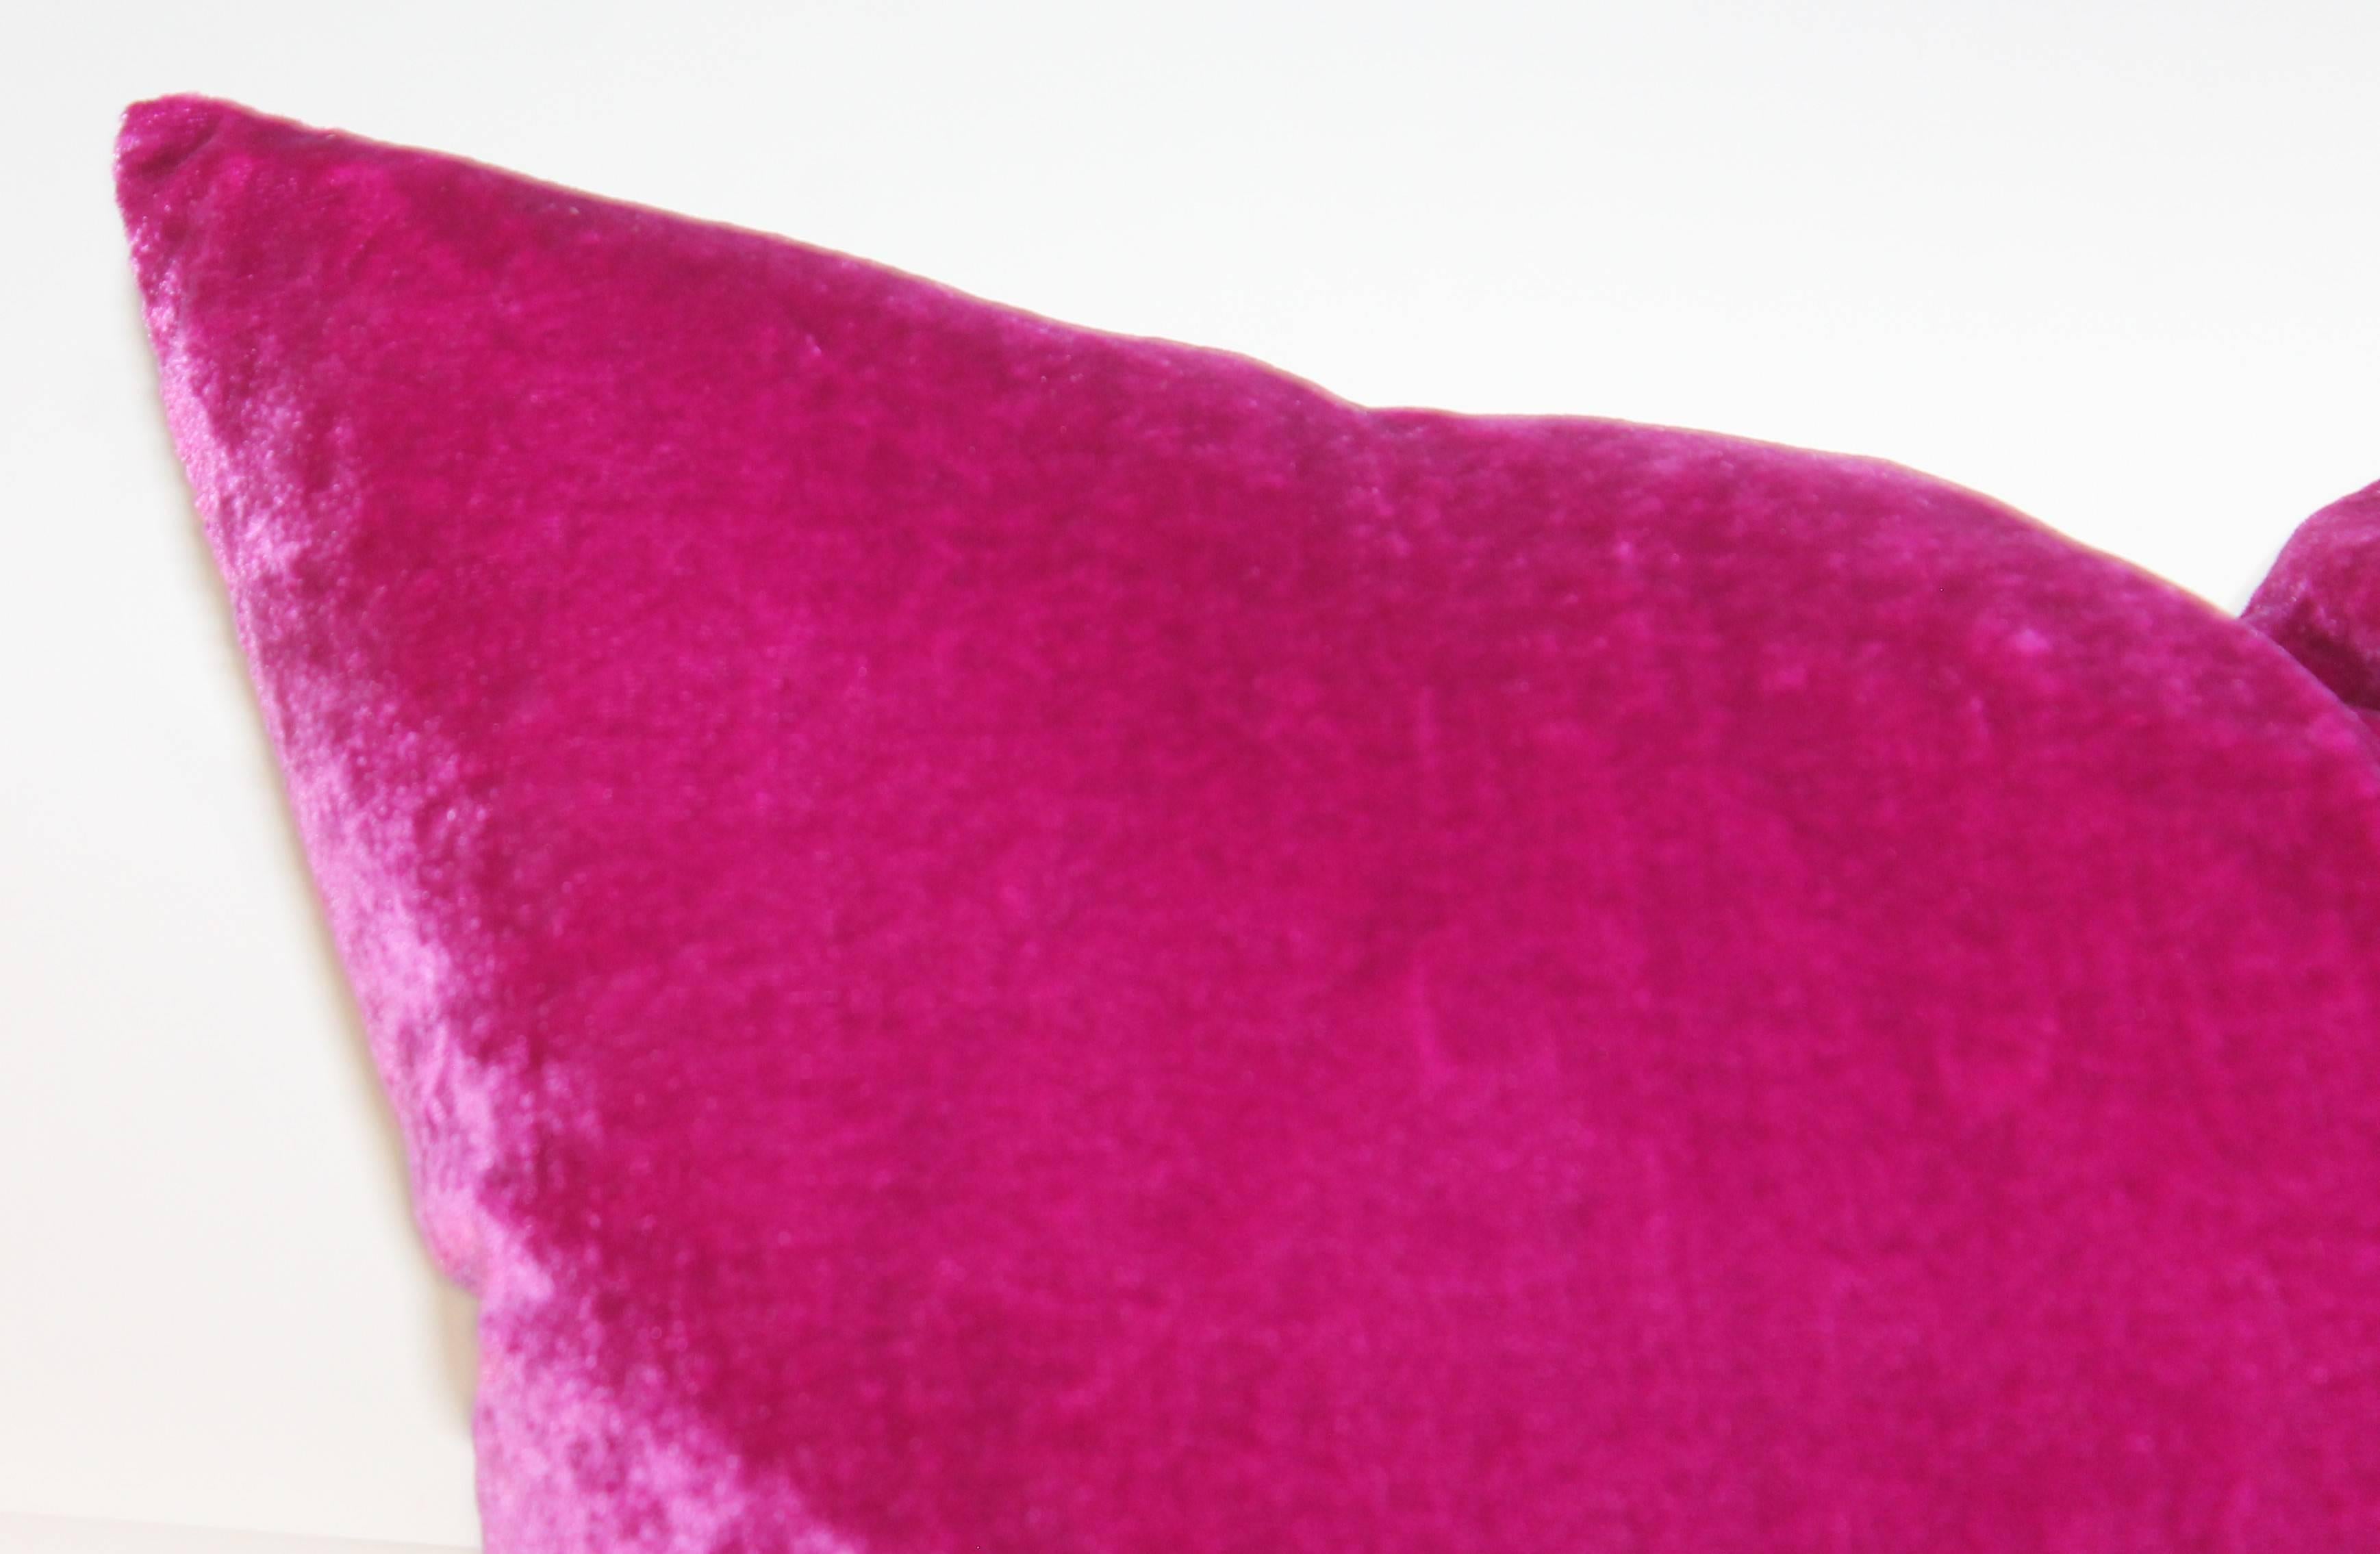 Romantic Pink Velvet Pillows / Collection of Four